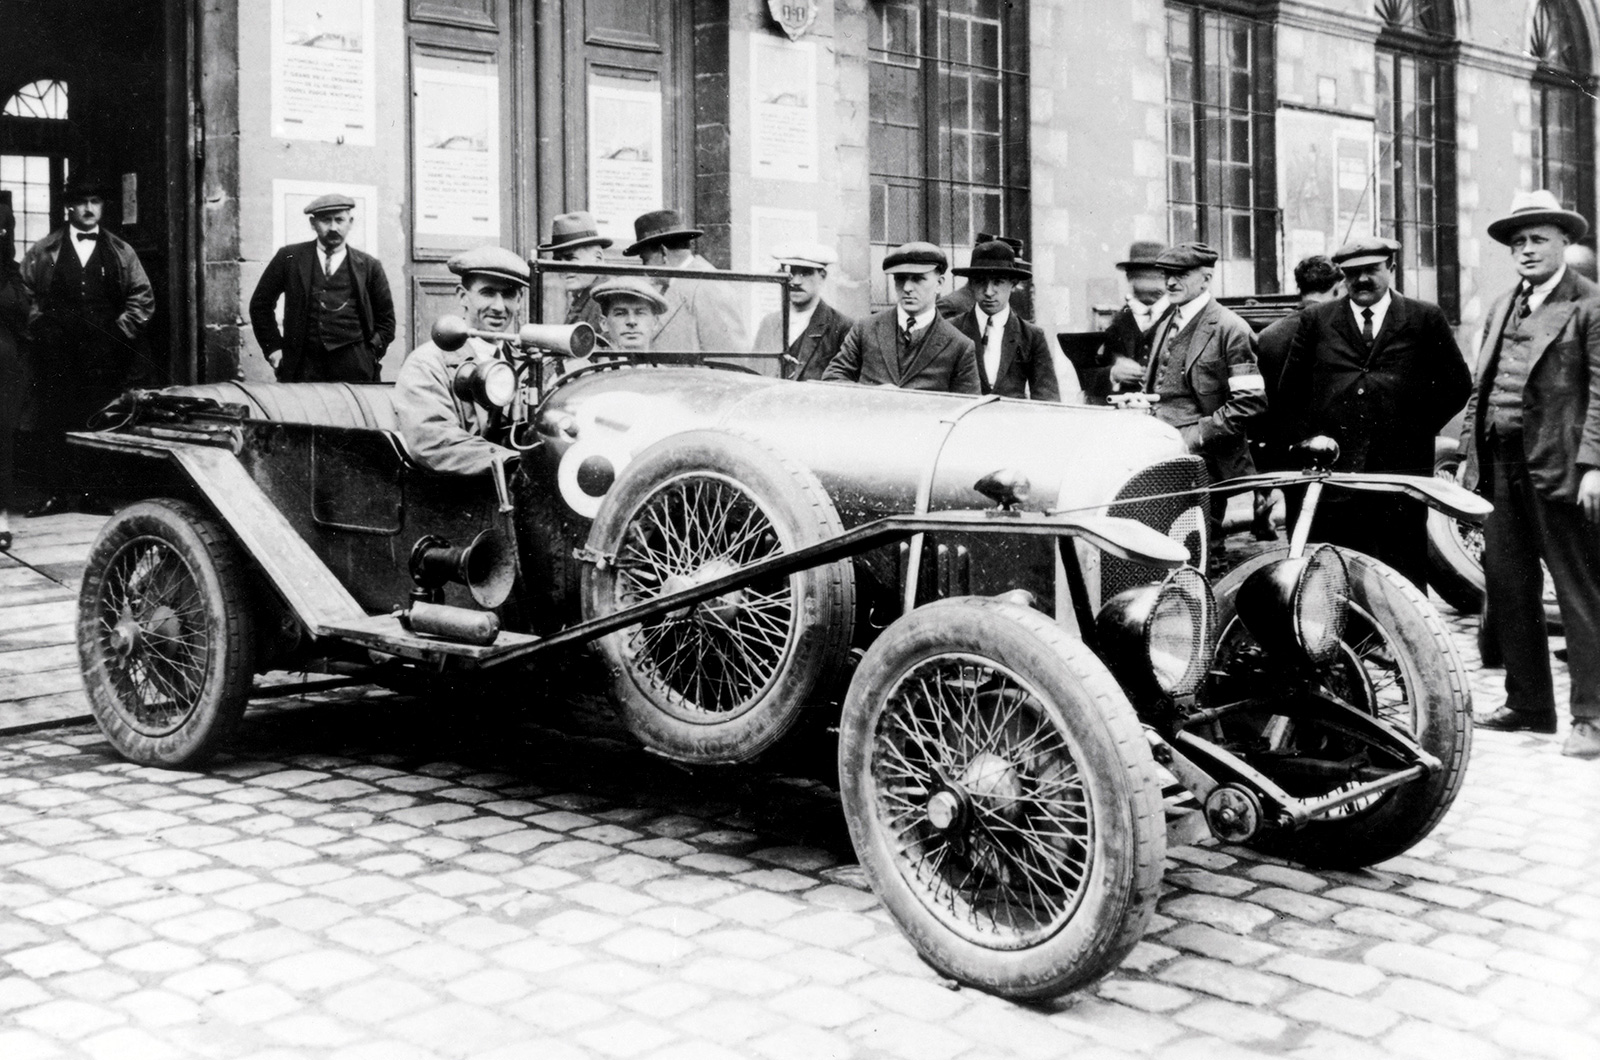 <p><span>Bentley took part in the inaugural <strong>Le Mans 24 Hours </strong>in 1923; it was rewarded with a fifth place. But the following year Bentley took gold, thanks to the efforts of <strong>Frank Clement </strong>and <strong>John Duff </strong>(pictured here); the winning car was Duff's own 3-Litre. Further Le Mans victories followed, with four consecutive wins between 1927 and 1930. It would then be another <strong>73 years </strong>before Bentley won again at Le Mans.</span></p>